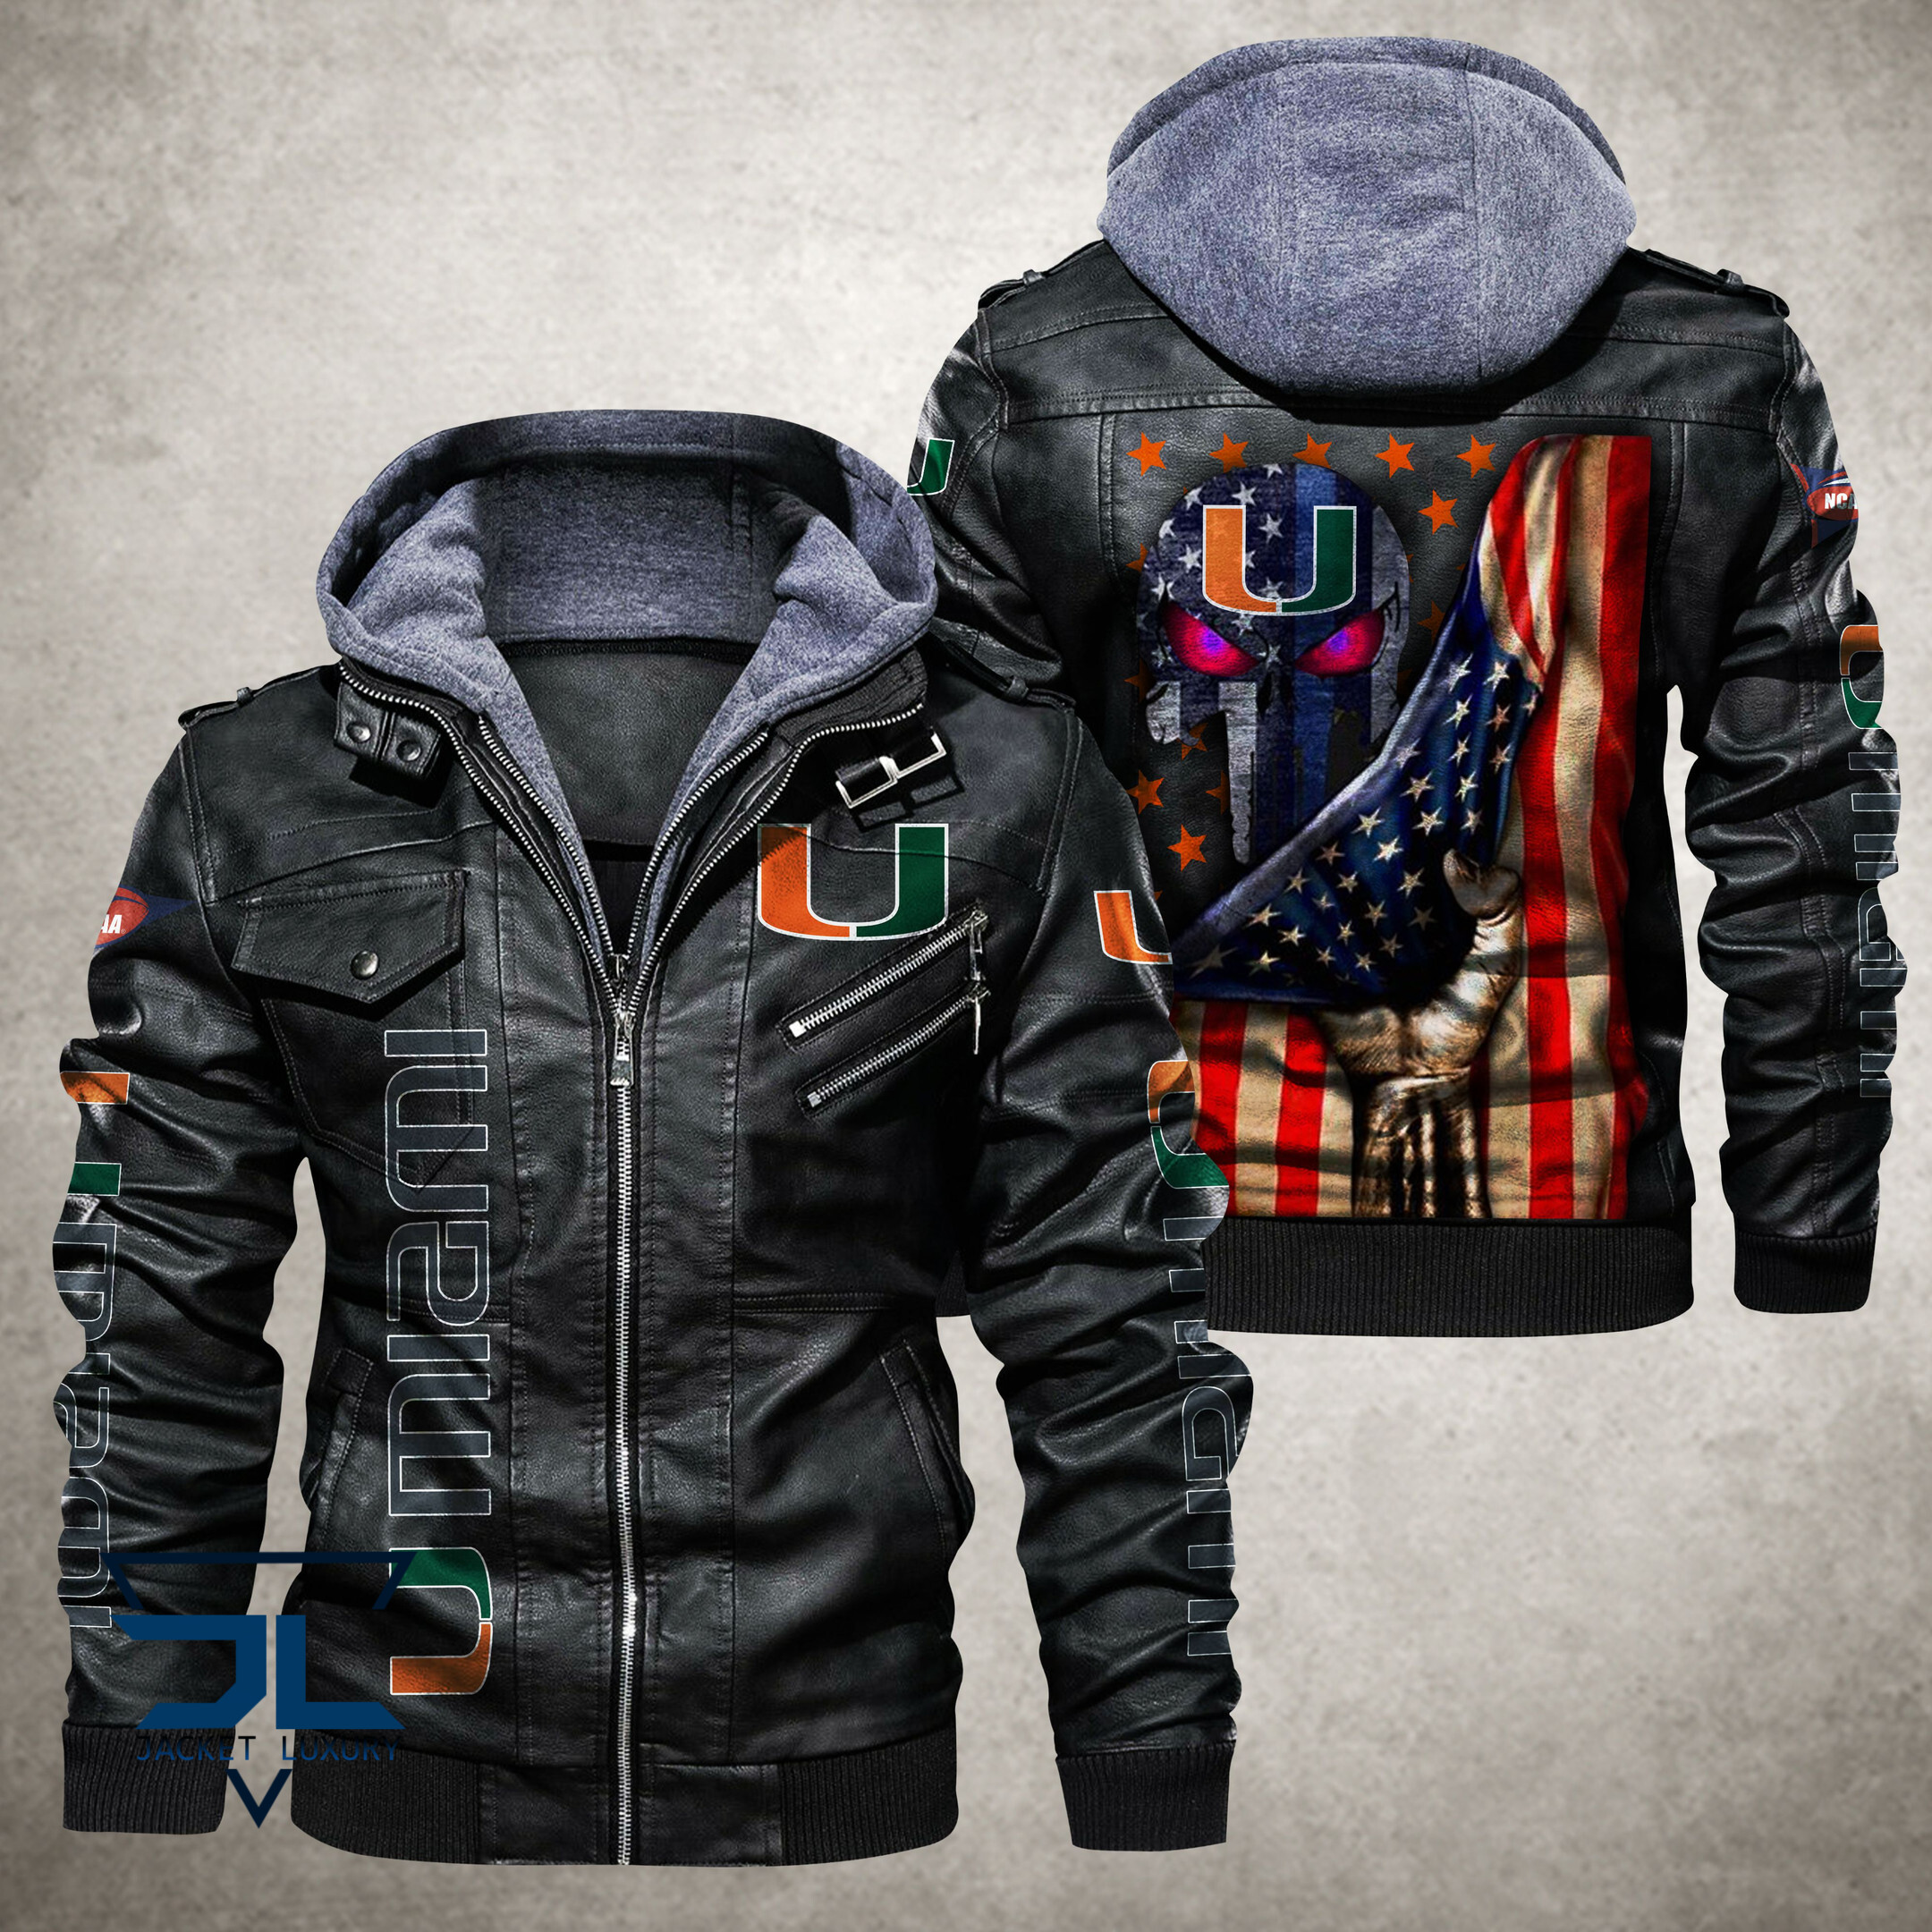 HOT Jacket only $69,99 so don't miss out - Be sure to pick up yours today! 369